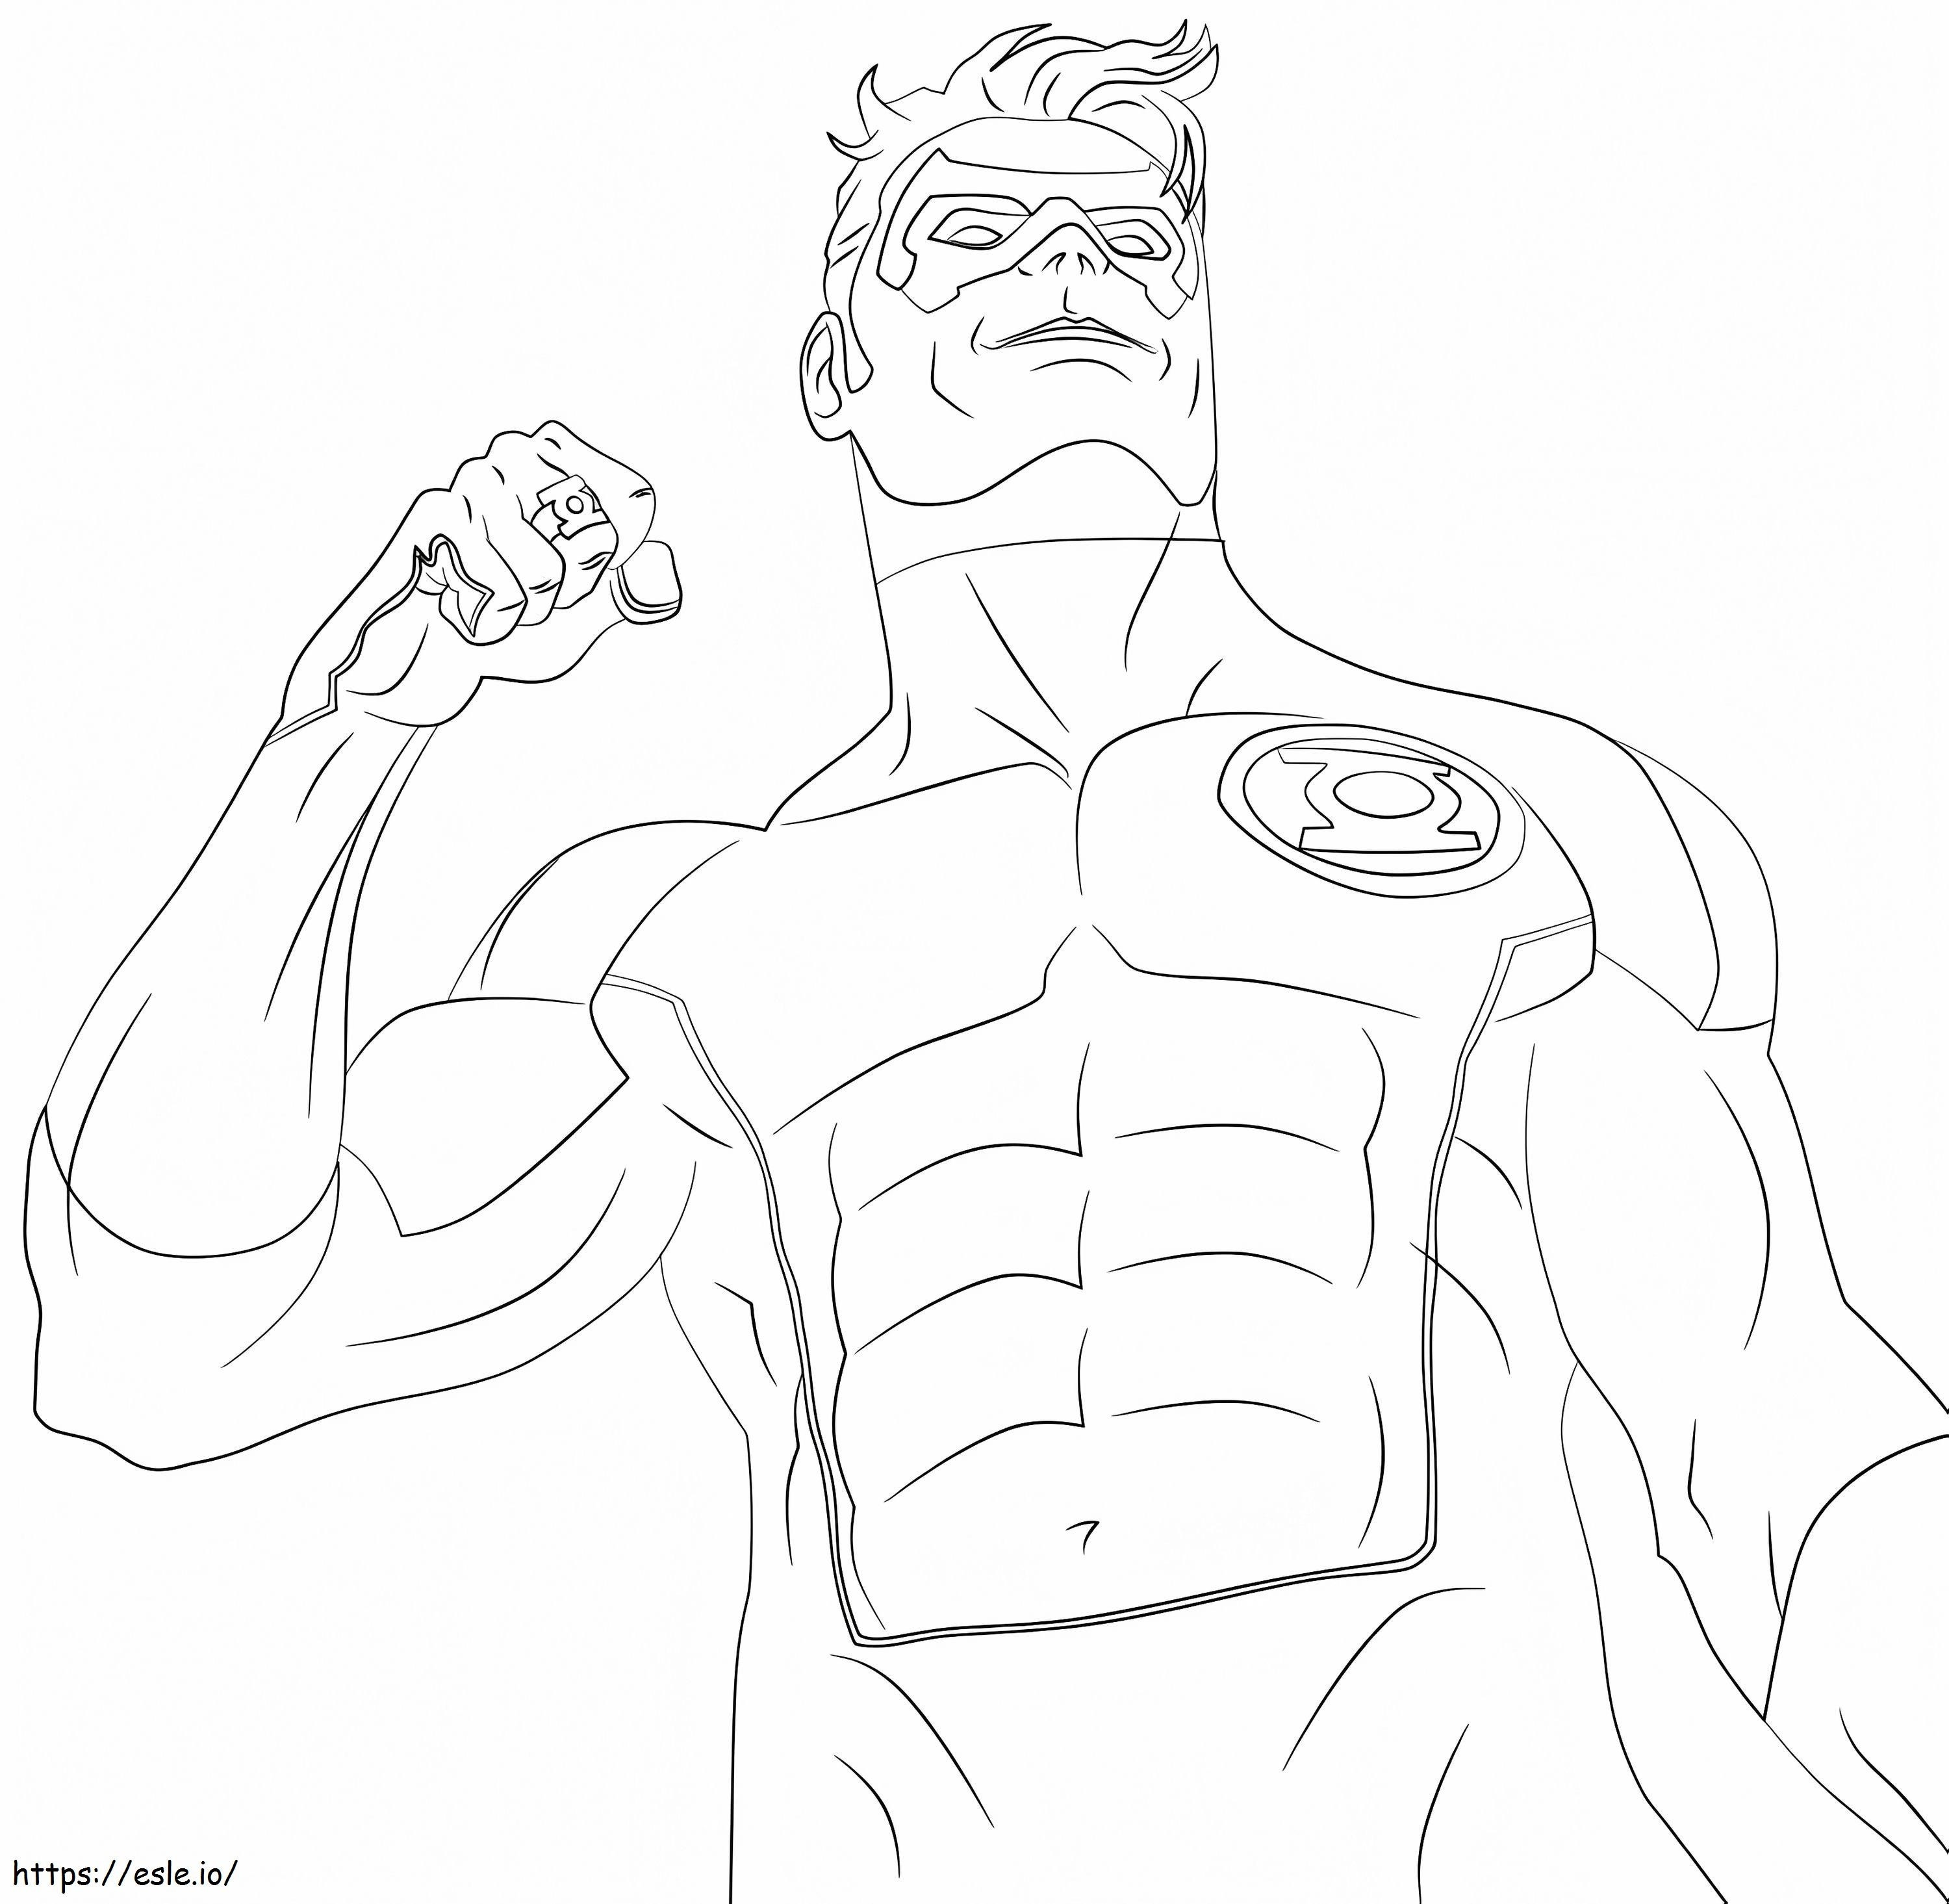 Happy Green Lantern coloring page